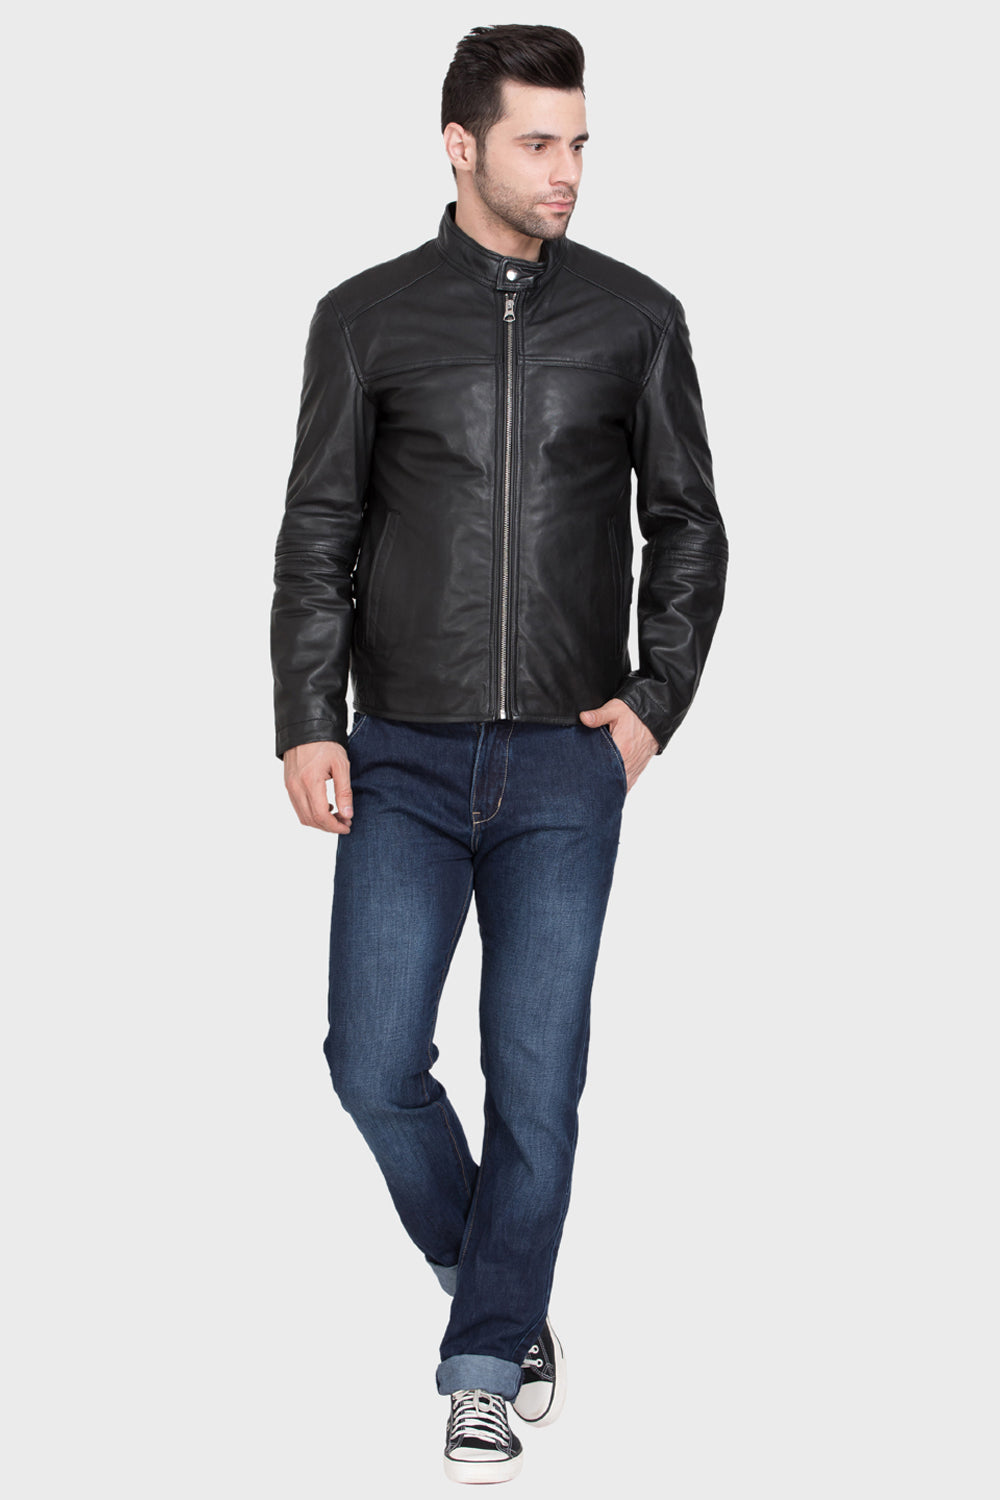 Justanned Black Front Zip Leather Jacket